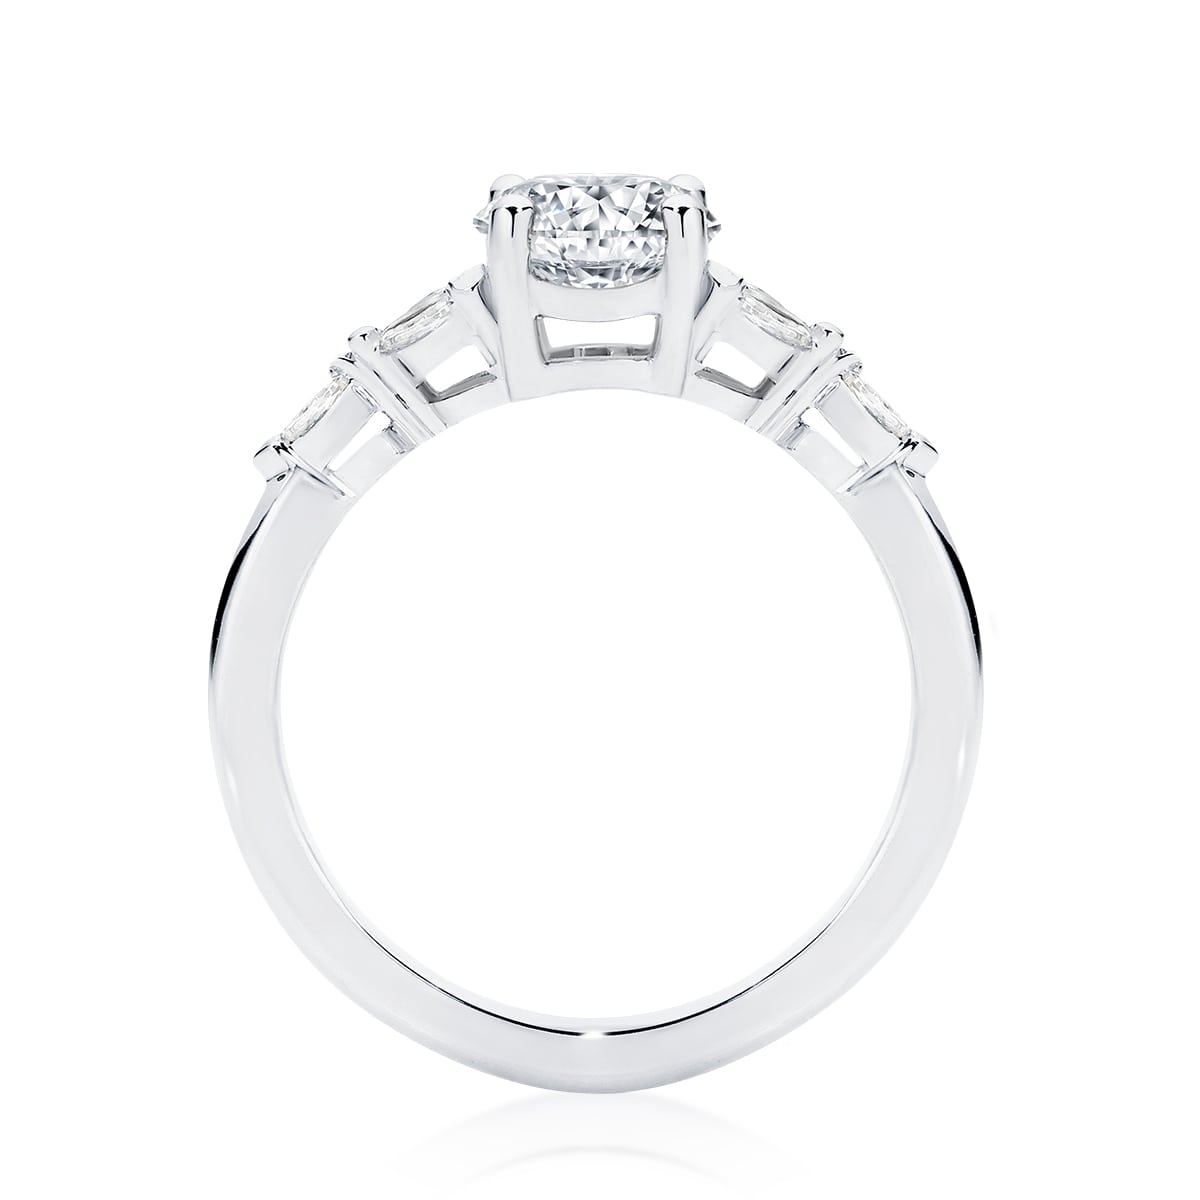 Amalfi (Diamond) Oval Engagement Ring with Side Stones in White Gold